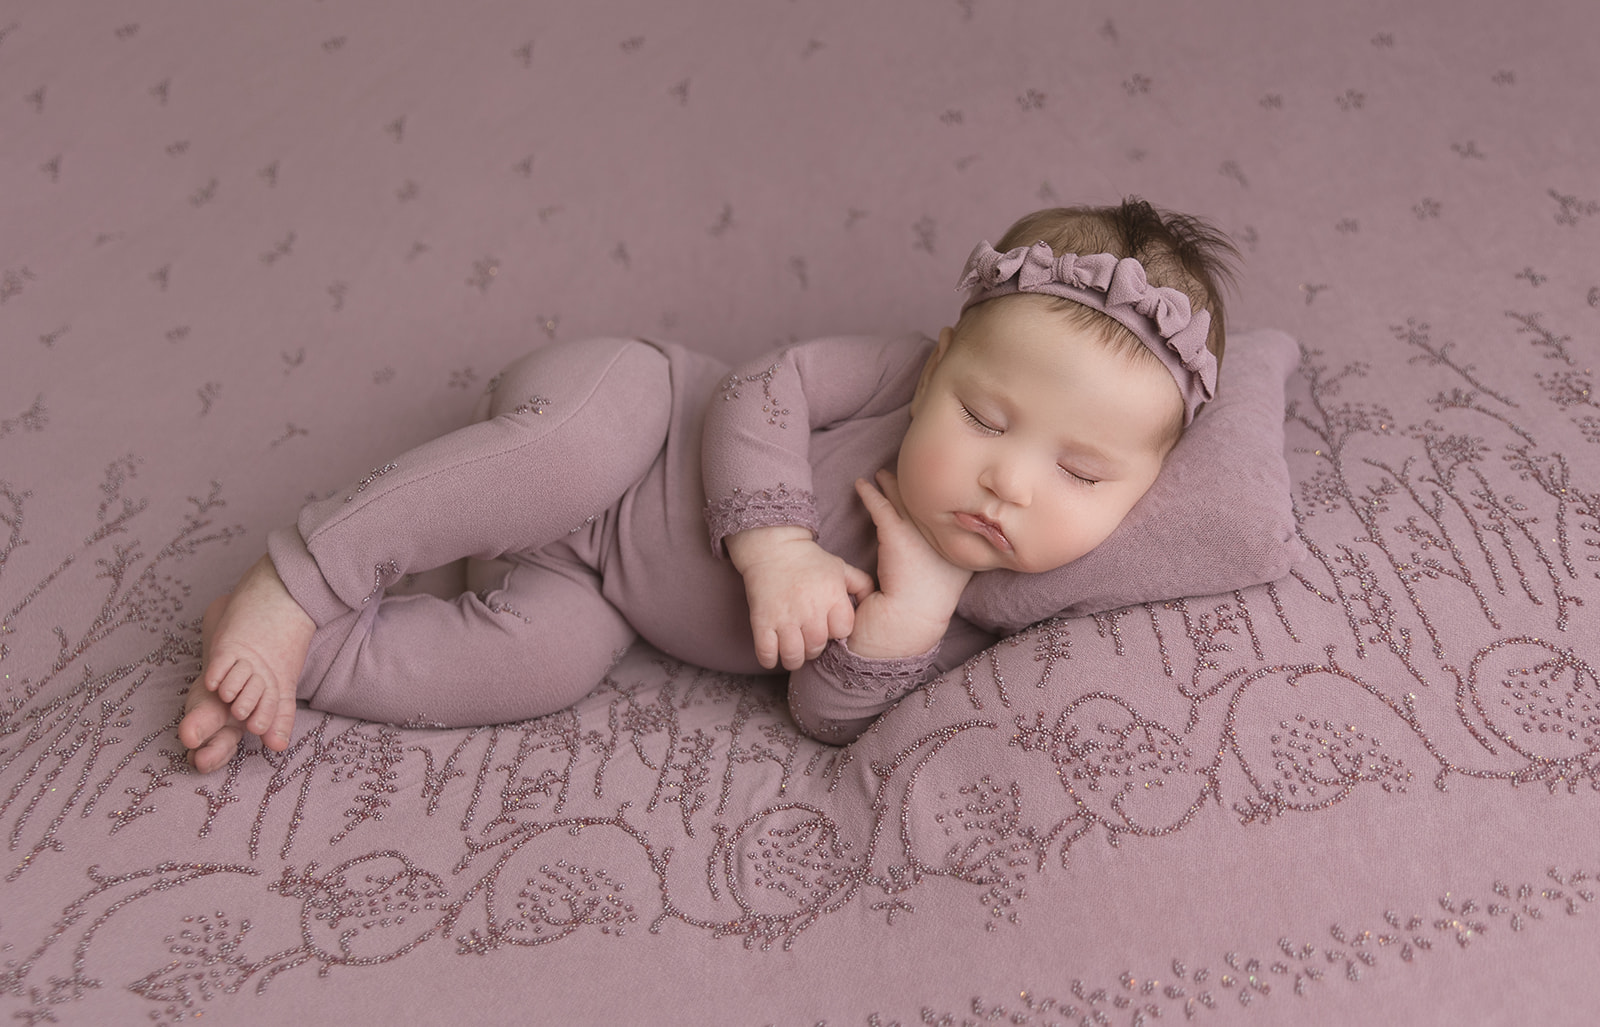 A newborn baby sleeps on her side in a purple onesie and matching headband